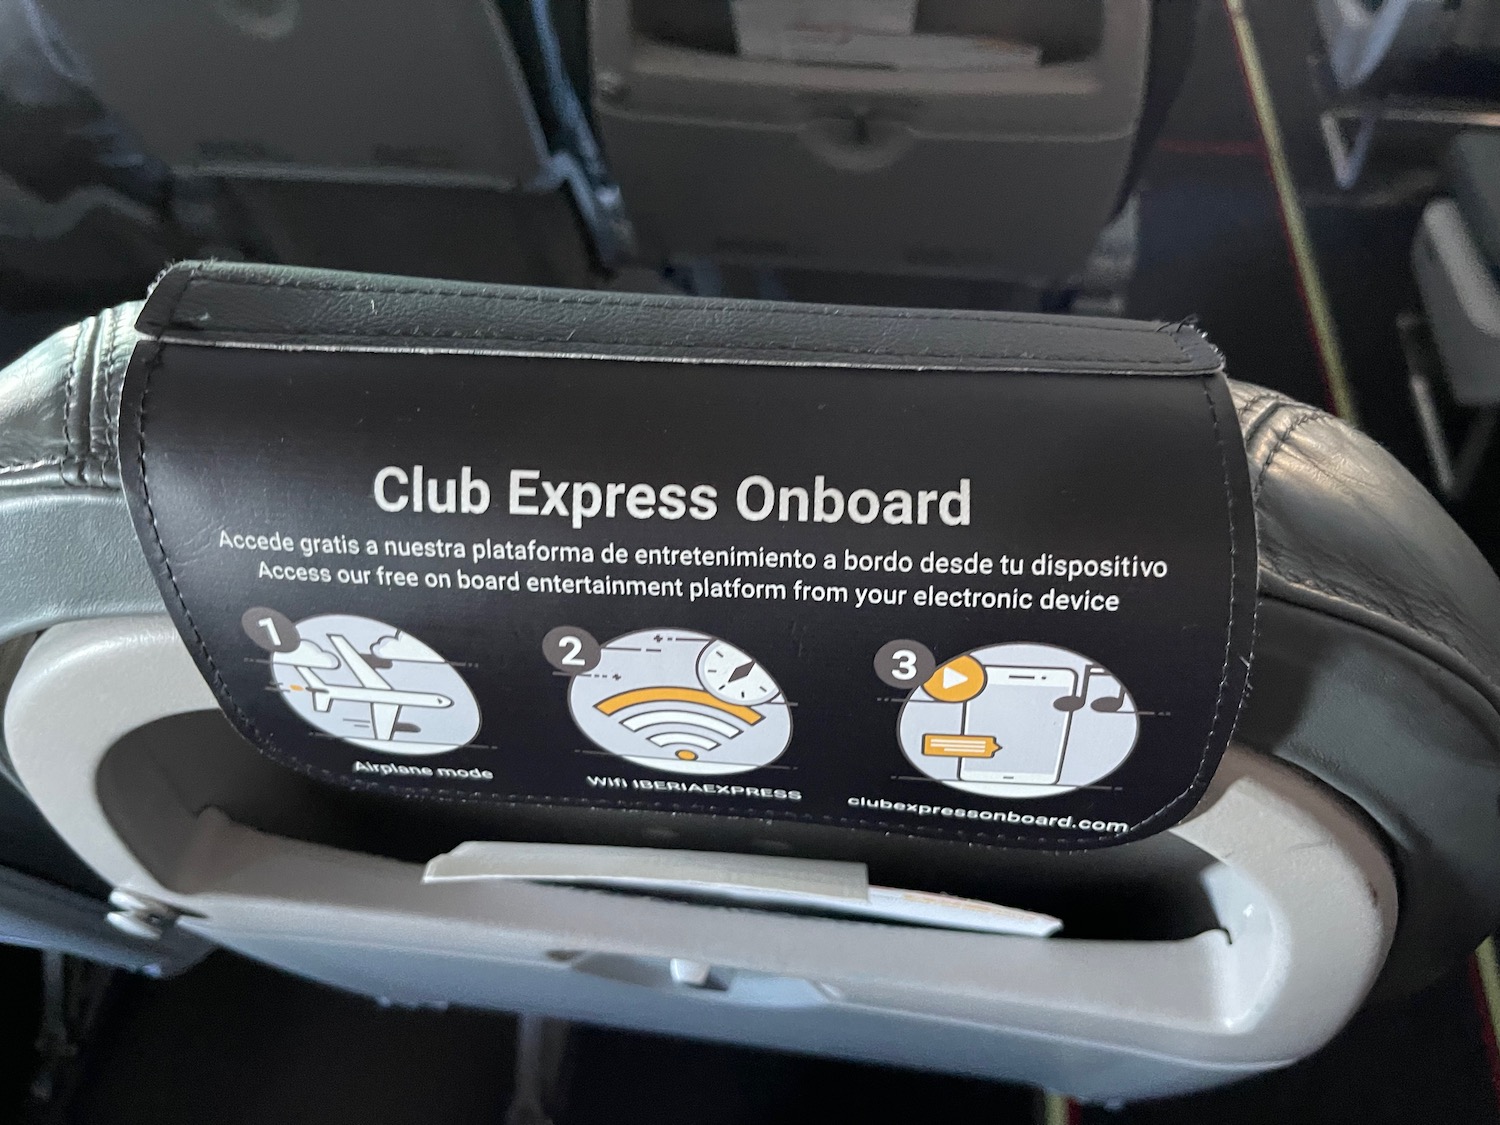 a sign on a seat